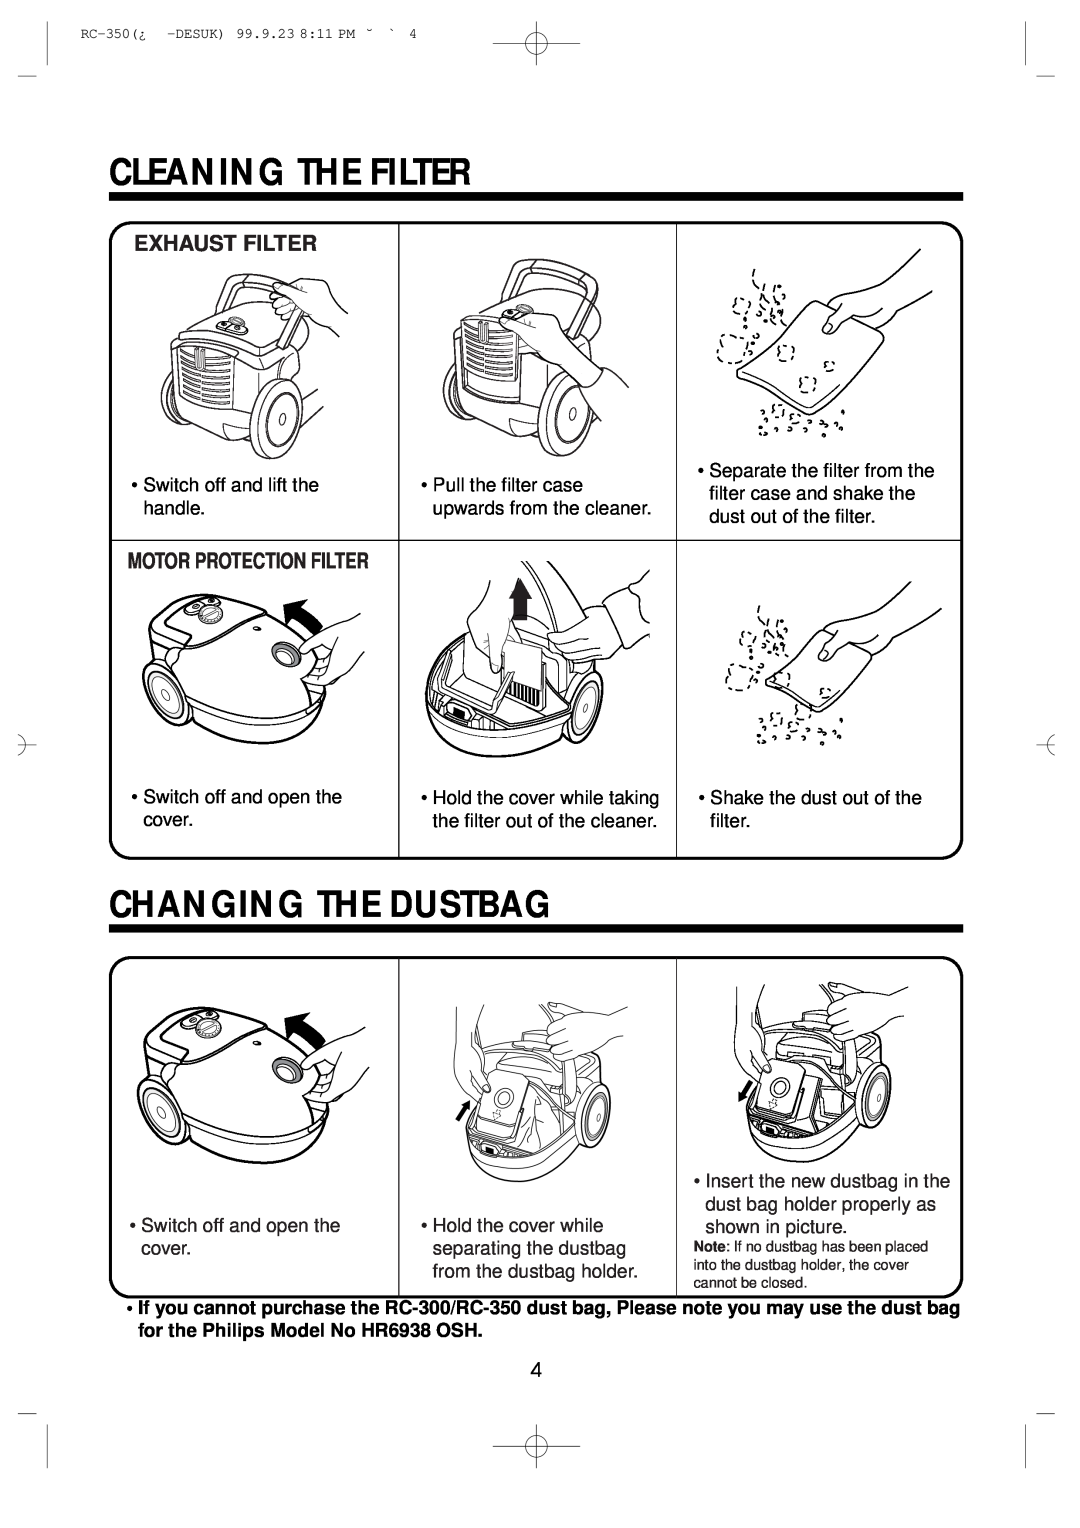 Daewoo RC-350 owner manual Cleaning The Filter, Changing The Dustbag, Exhaust Filter, Motor Protection Filter 